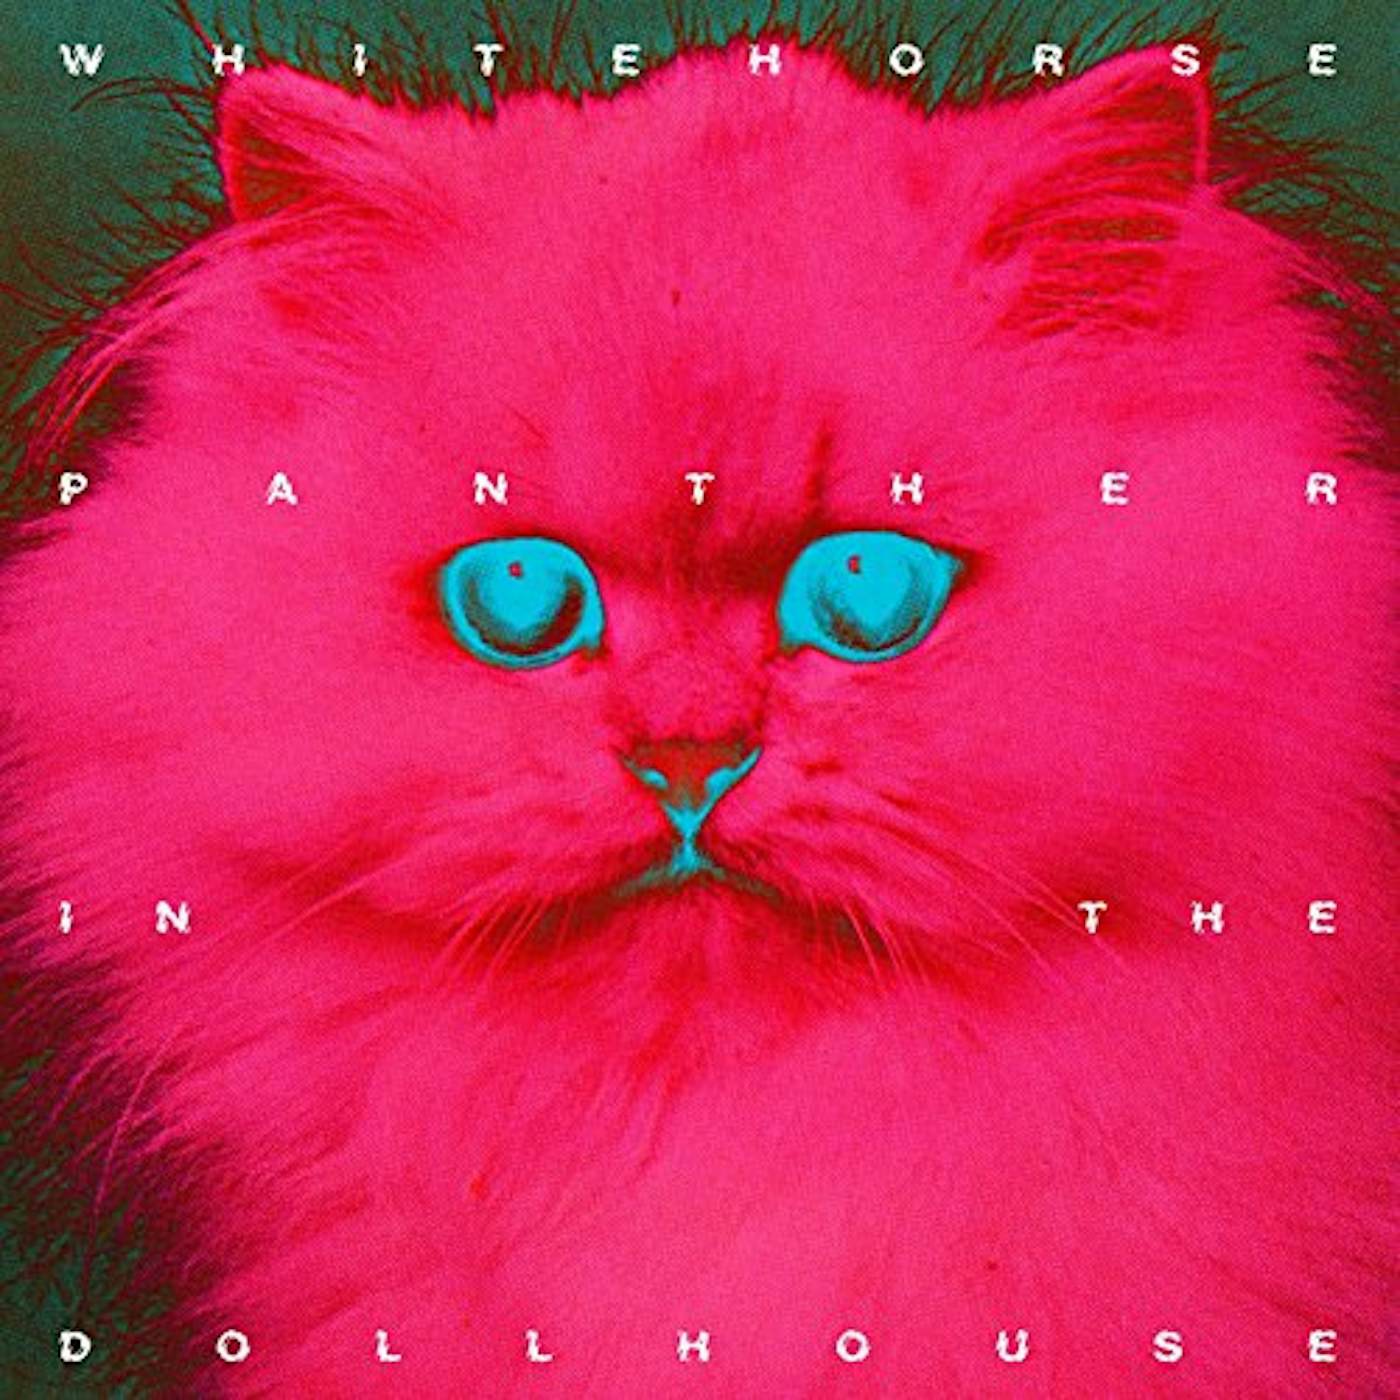 Whitehorse Panther In The Dollhouse Vinyl Record